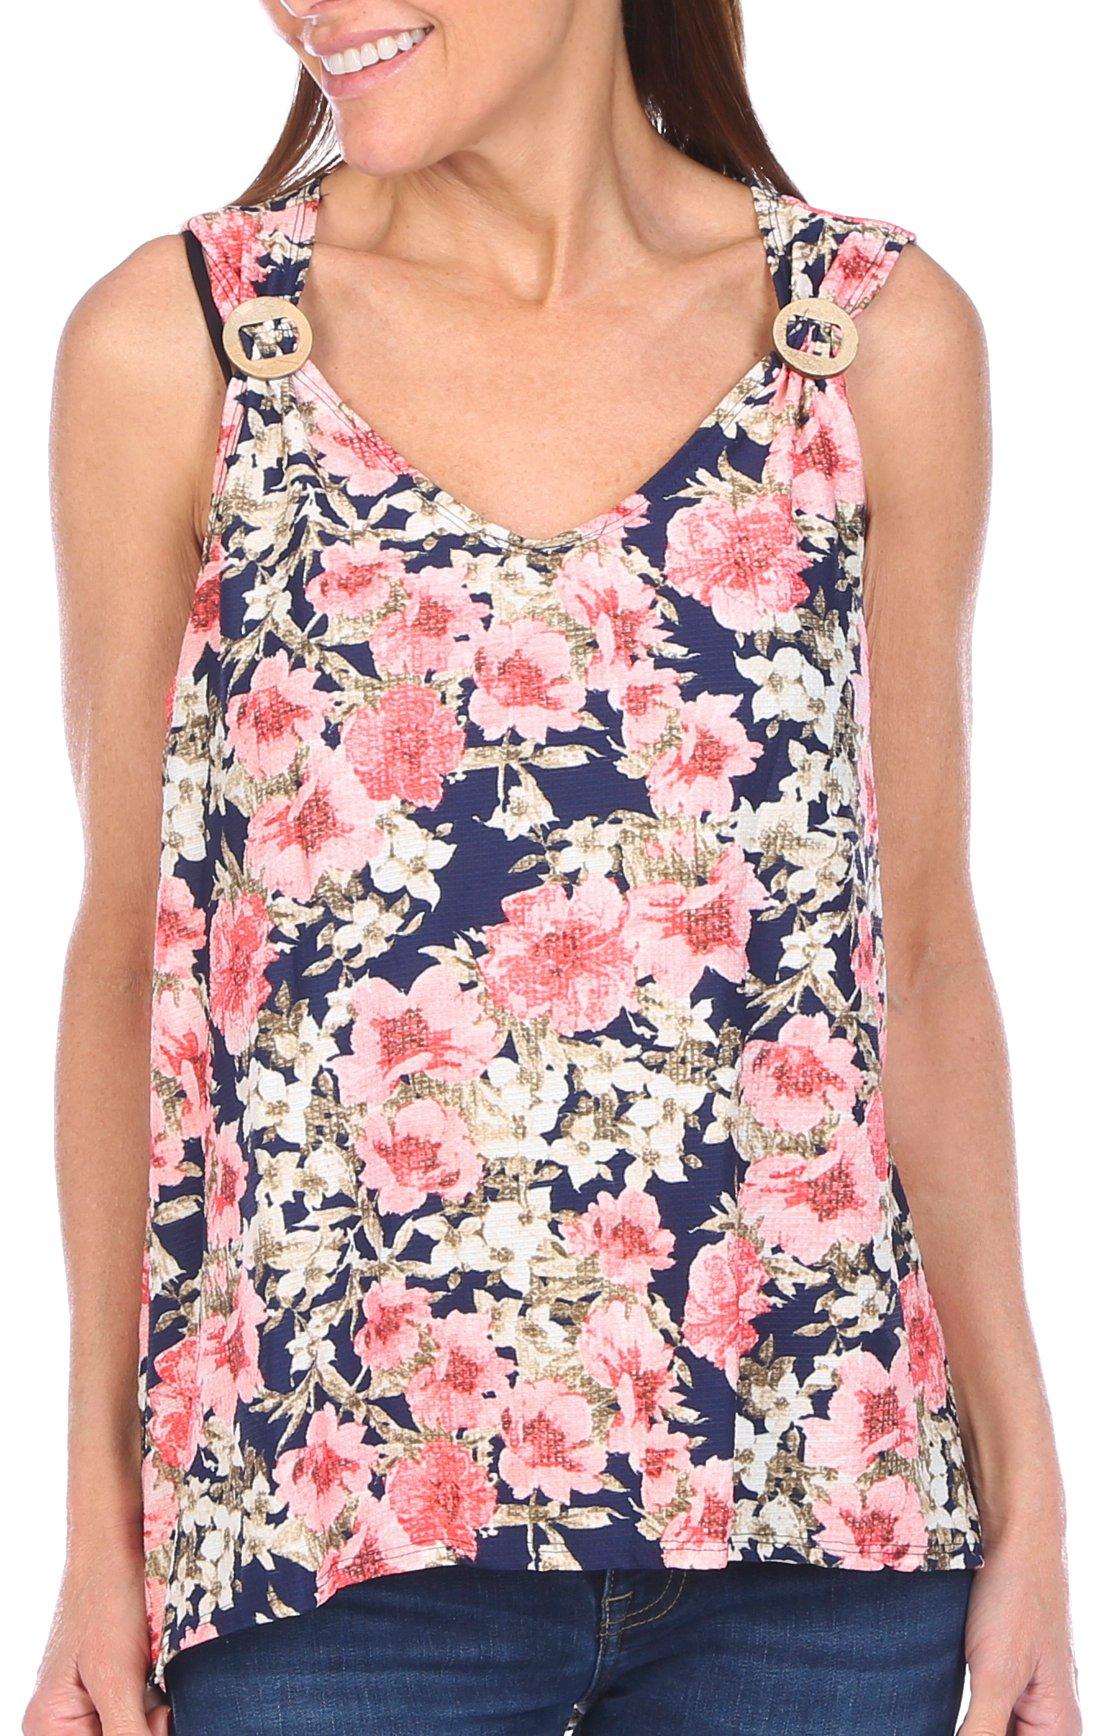 Juniper + Lime Womens Floral Coconut O-Ring Sleeveless